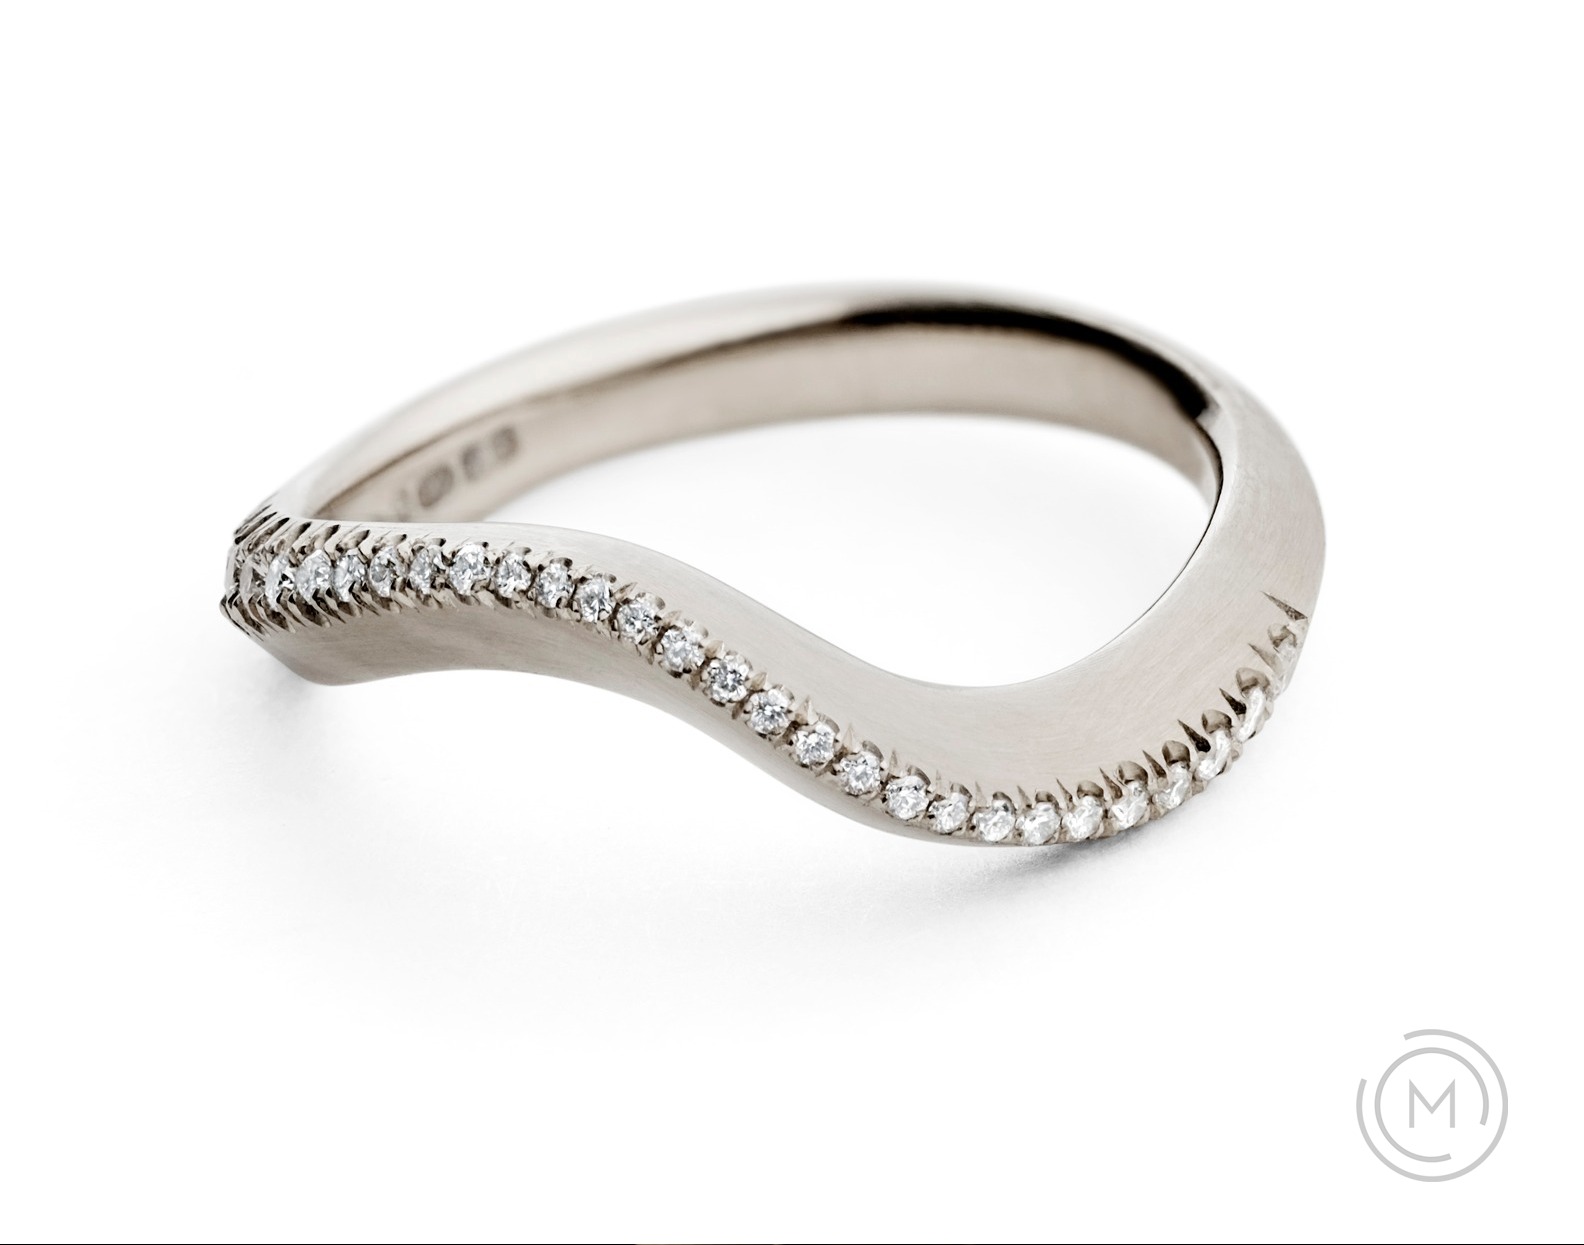 Carved white gold and diamond combined engagement and wedding ring